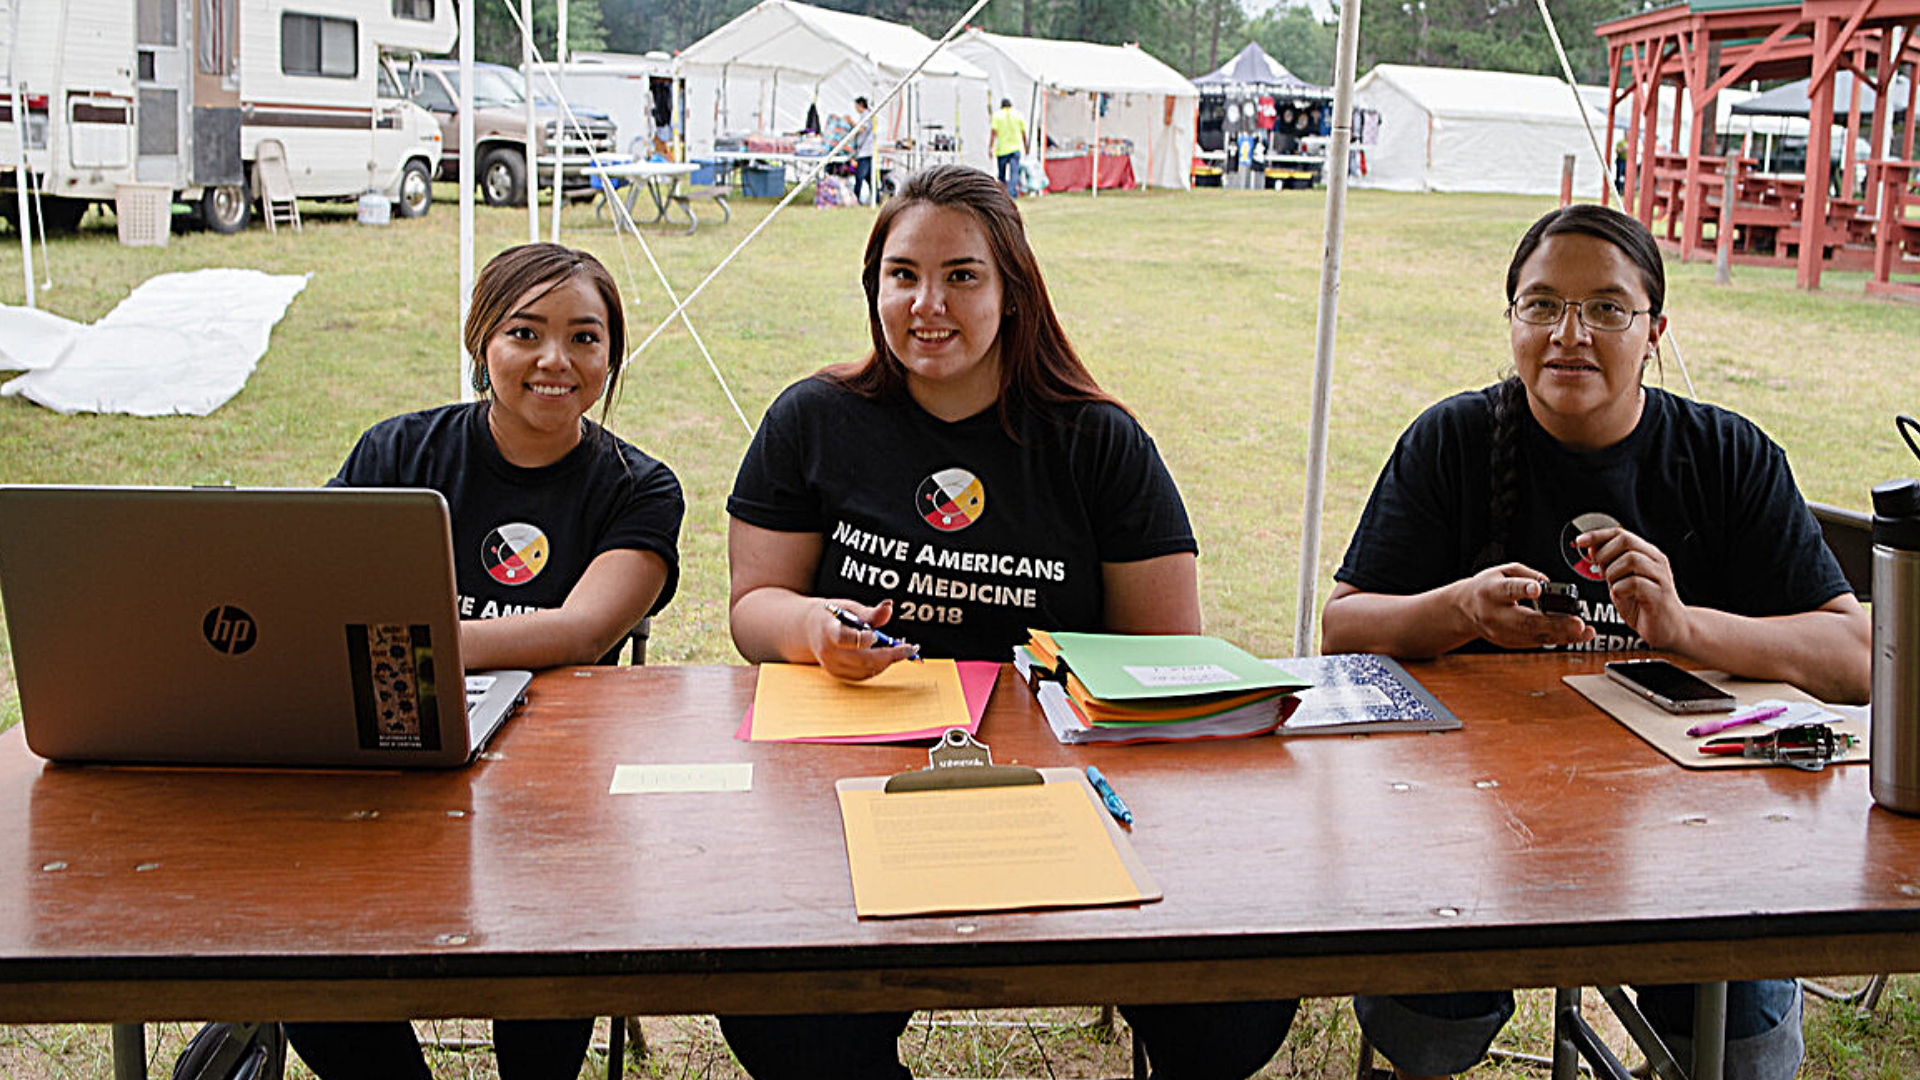 Early Pathways: ‘Native Americans Into Medicine’ Inspires Future Careers in Tribal Health